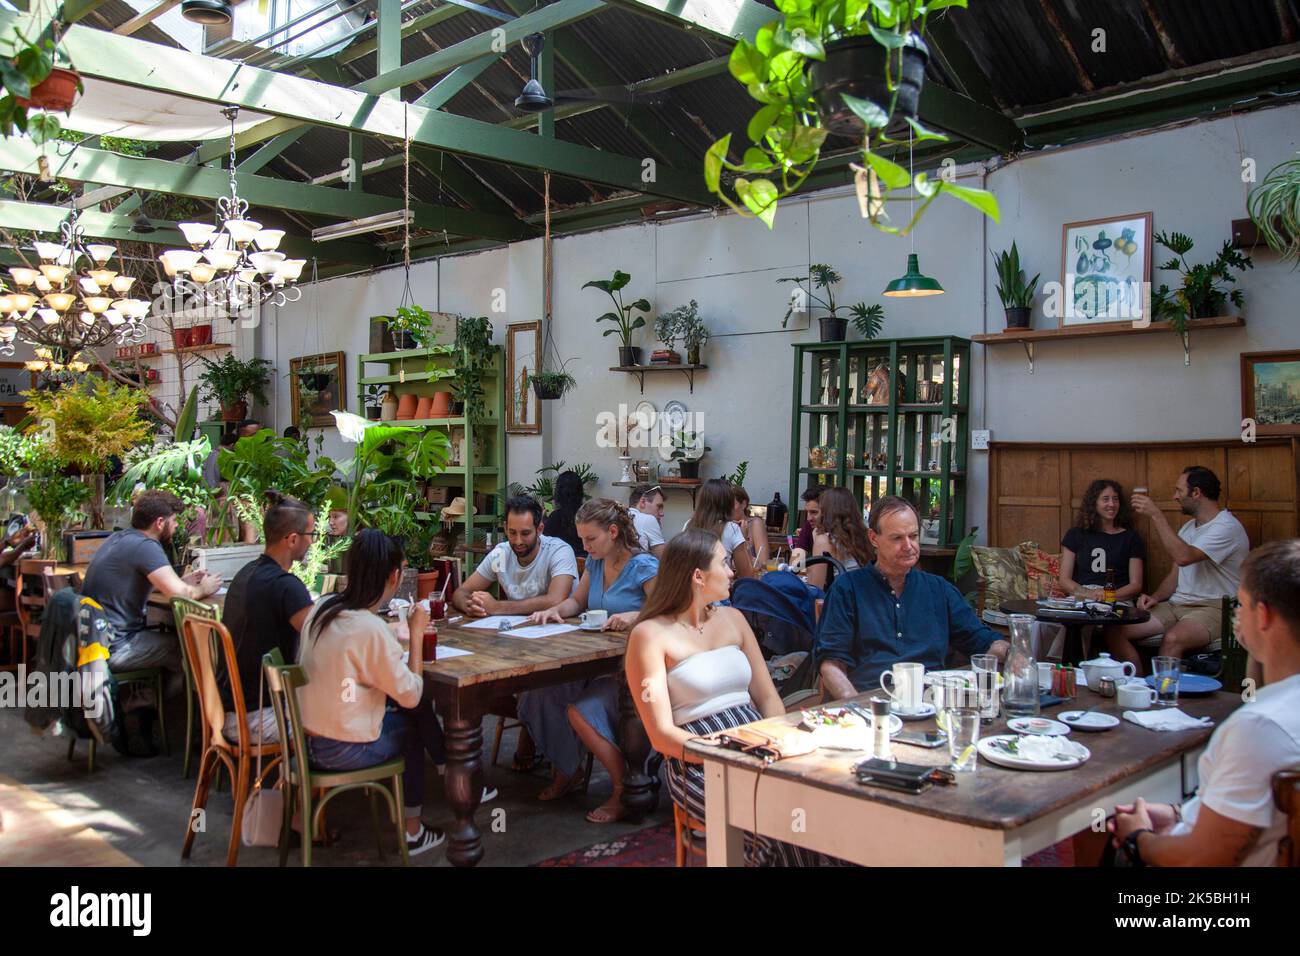 'Our Local' Restaurant on Kloof Street - Cape Town, South Africa Stock Photo